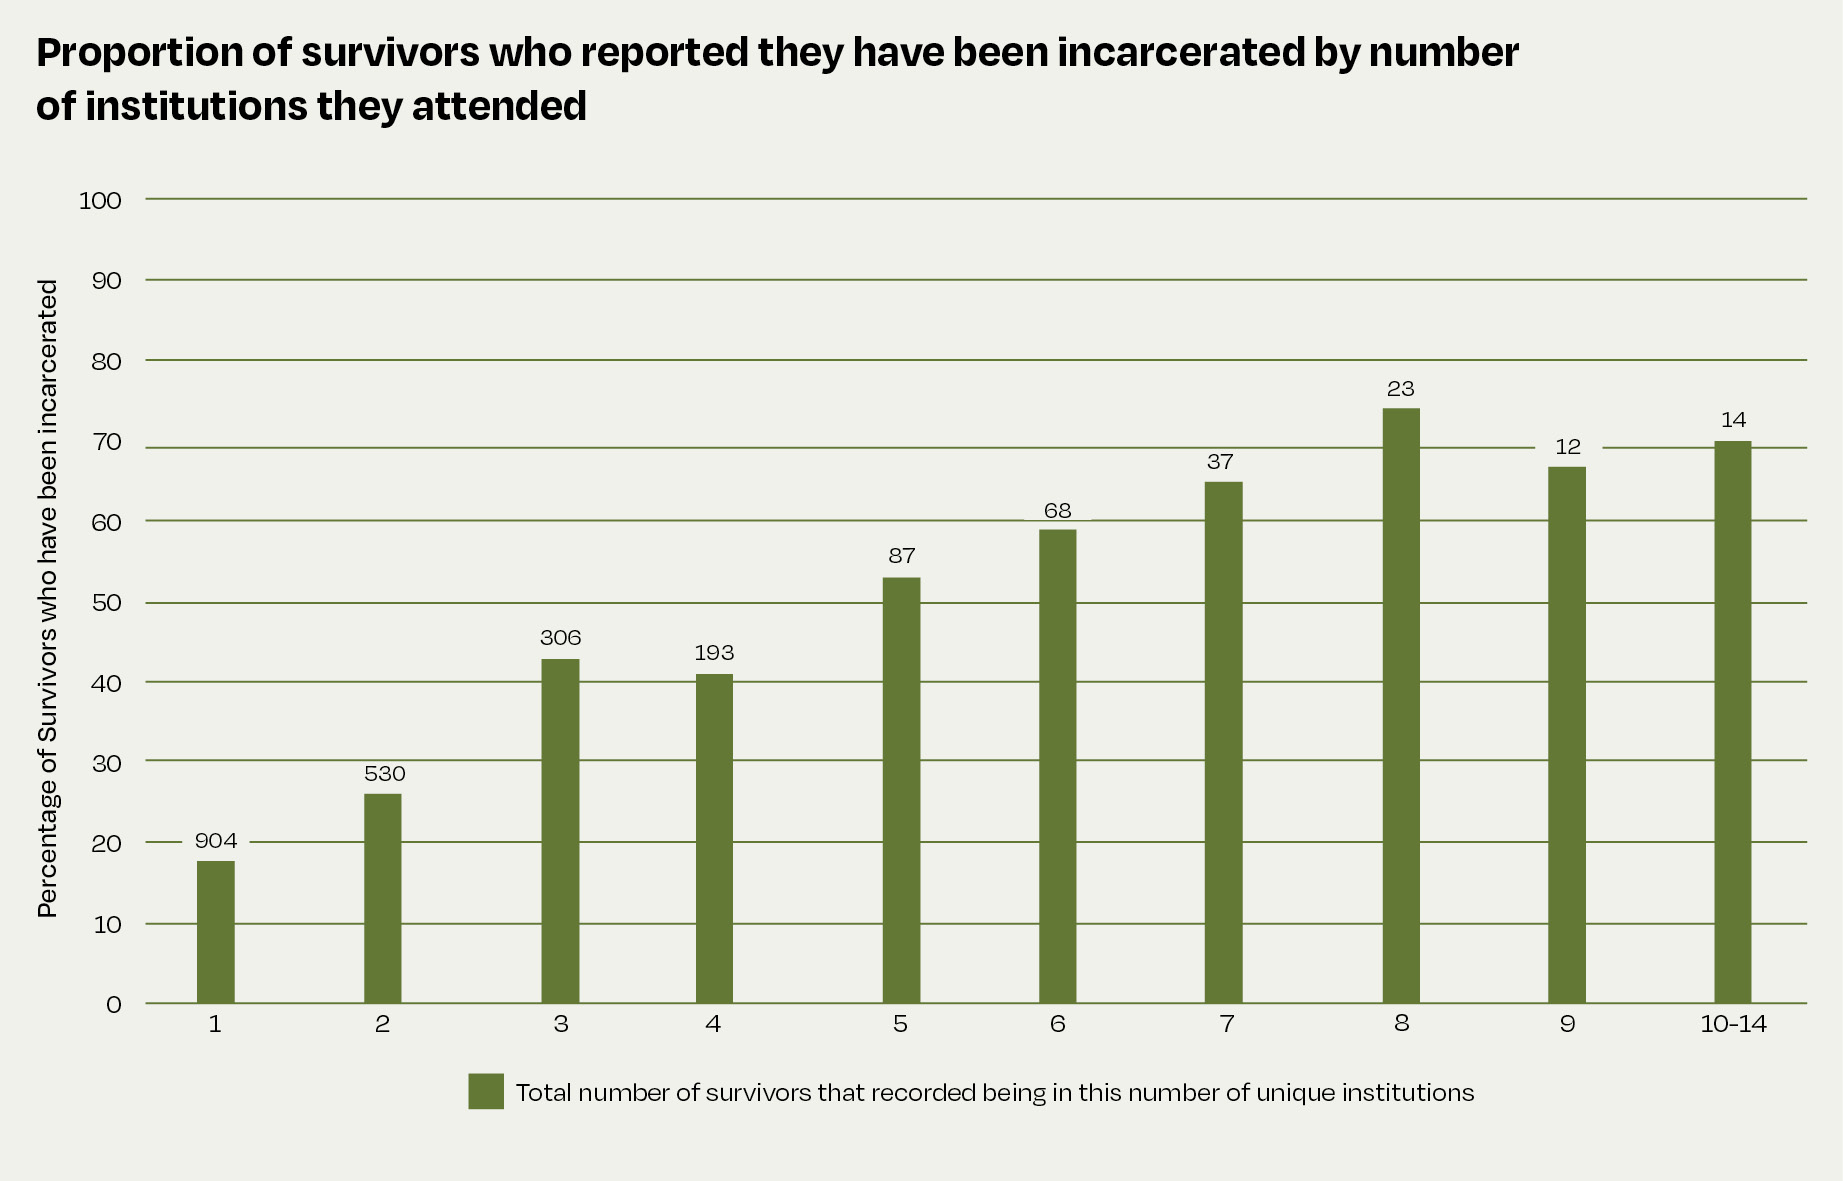 This bar graph shows that of the 904 survivors who attended 1 institution, 18 percent went to prison. Of the 530 survivors who attended 2 institutions, 26 percent went to prison. Of the 306 survivors who attended 3 institutions, 43 percent went to prison. Of the 193 survivors who attended 4 institutions, 41 percent went to prison. Of the 87 survivors who attended 5 institutions, 53 percent went to prison. Of the 68 survivors who attended 6 institutions, 59 percent went to prison. Of the 37 survivors who attended 7 institutions, 65 percent went to prison. Of the 23 survivors who attended 8 institutions, 74 percent went to prison. Of the 12 survivors who attended 9 institutions, 67 percent went to prison. Of the 14 survivors who attended 10 to 14 institutions, 71 percent went to prison.  